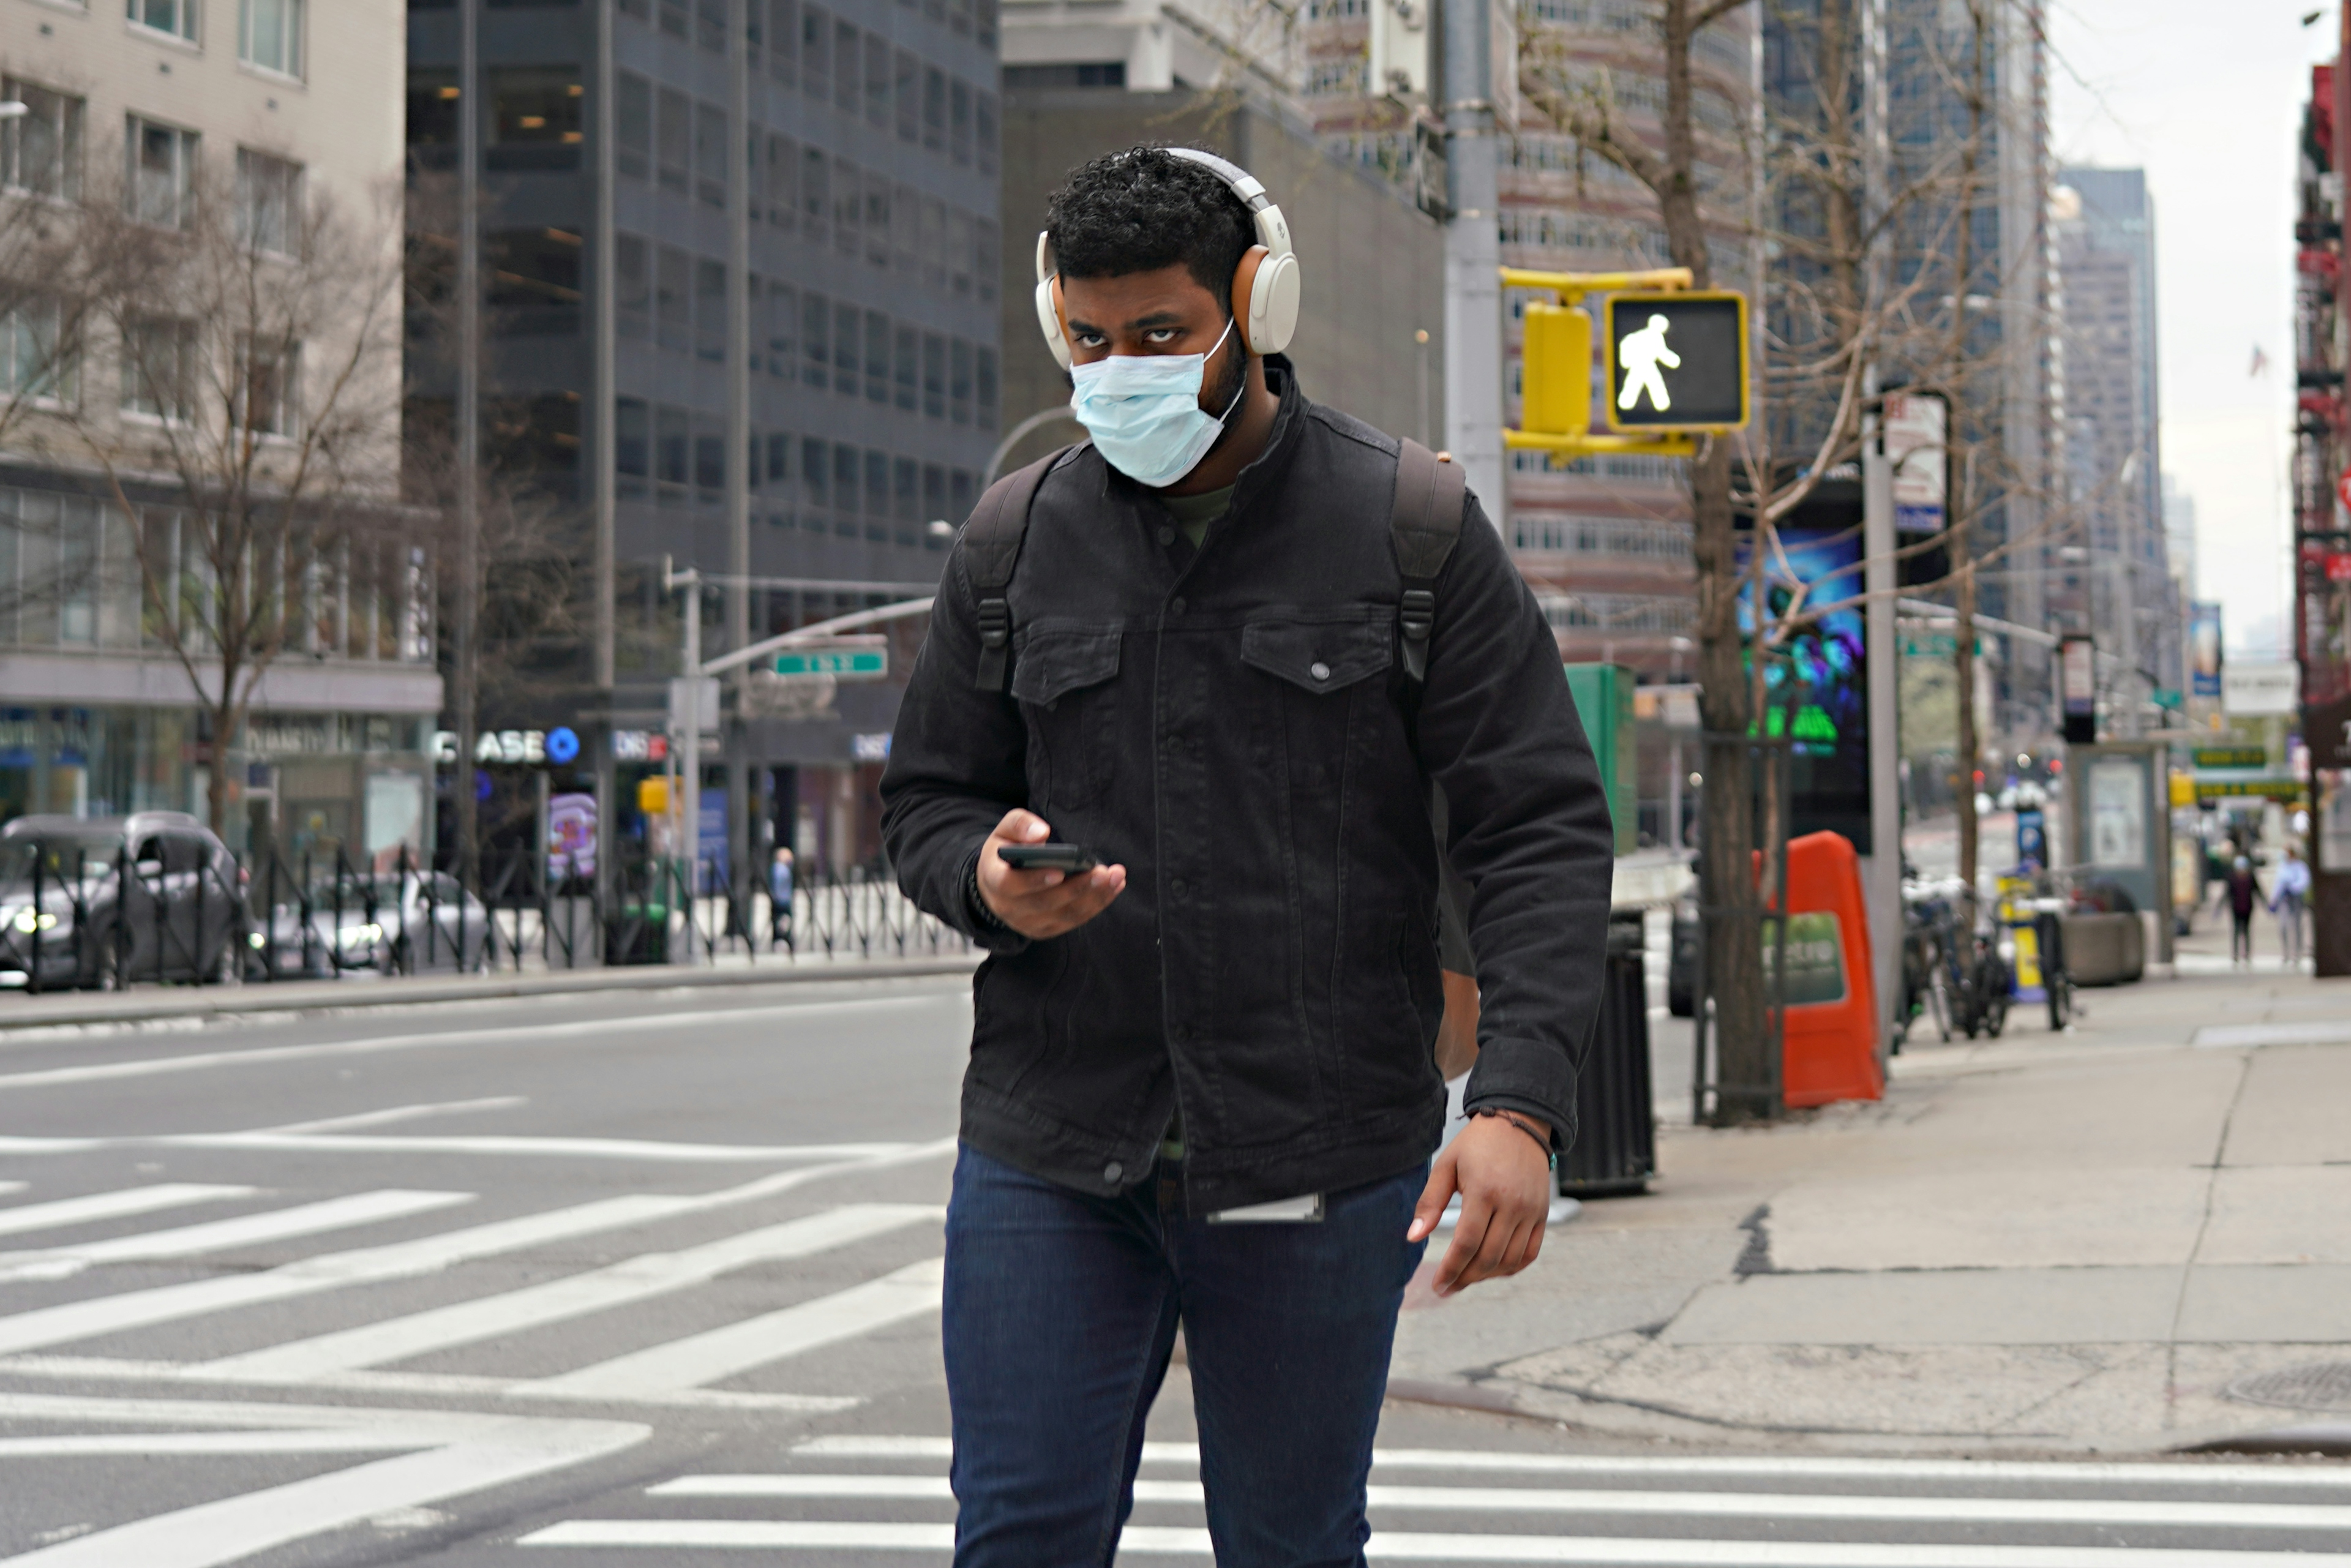 Man wearing mask in New York City